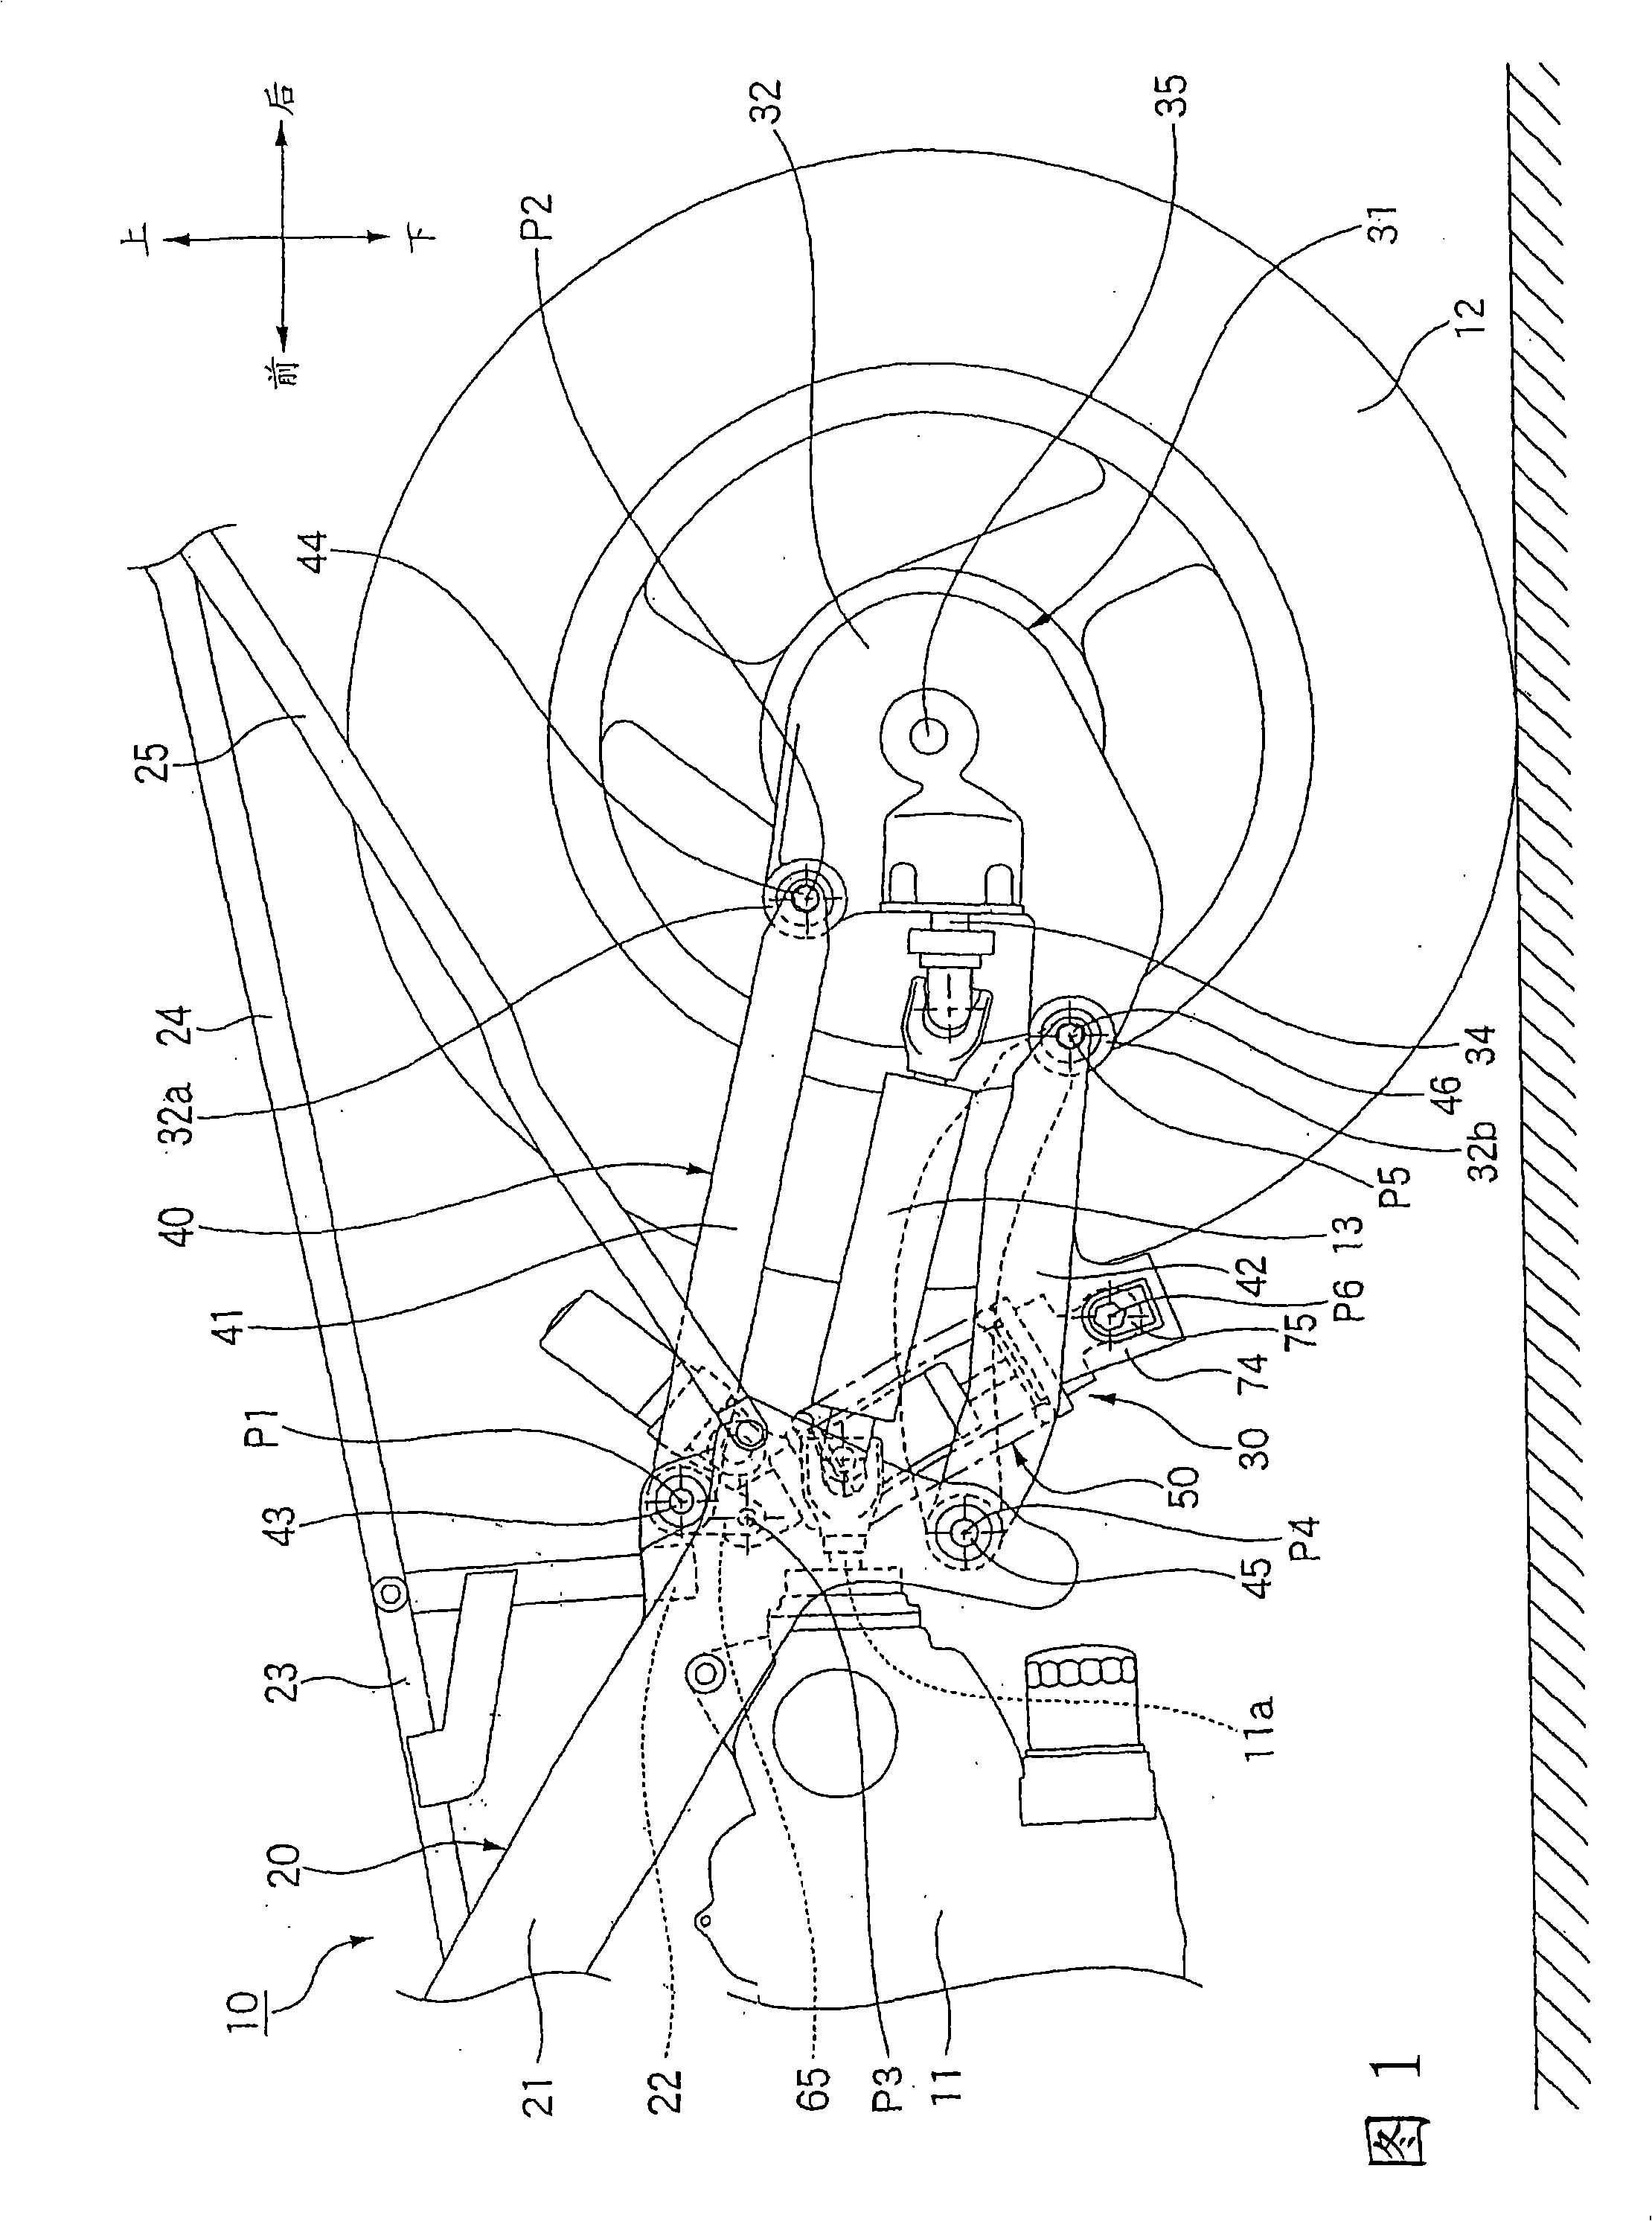 Rear wheel suspension for a motorcycle and swing arm attachment structure for a motorcycle